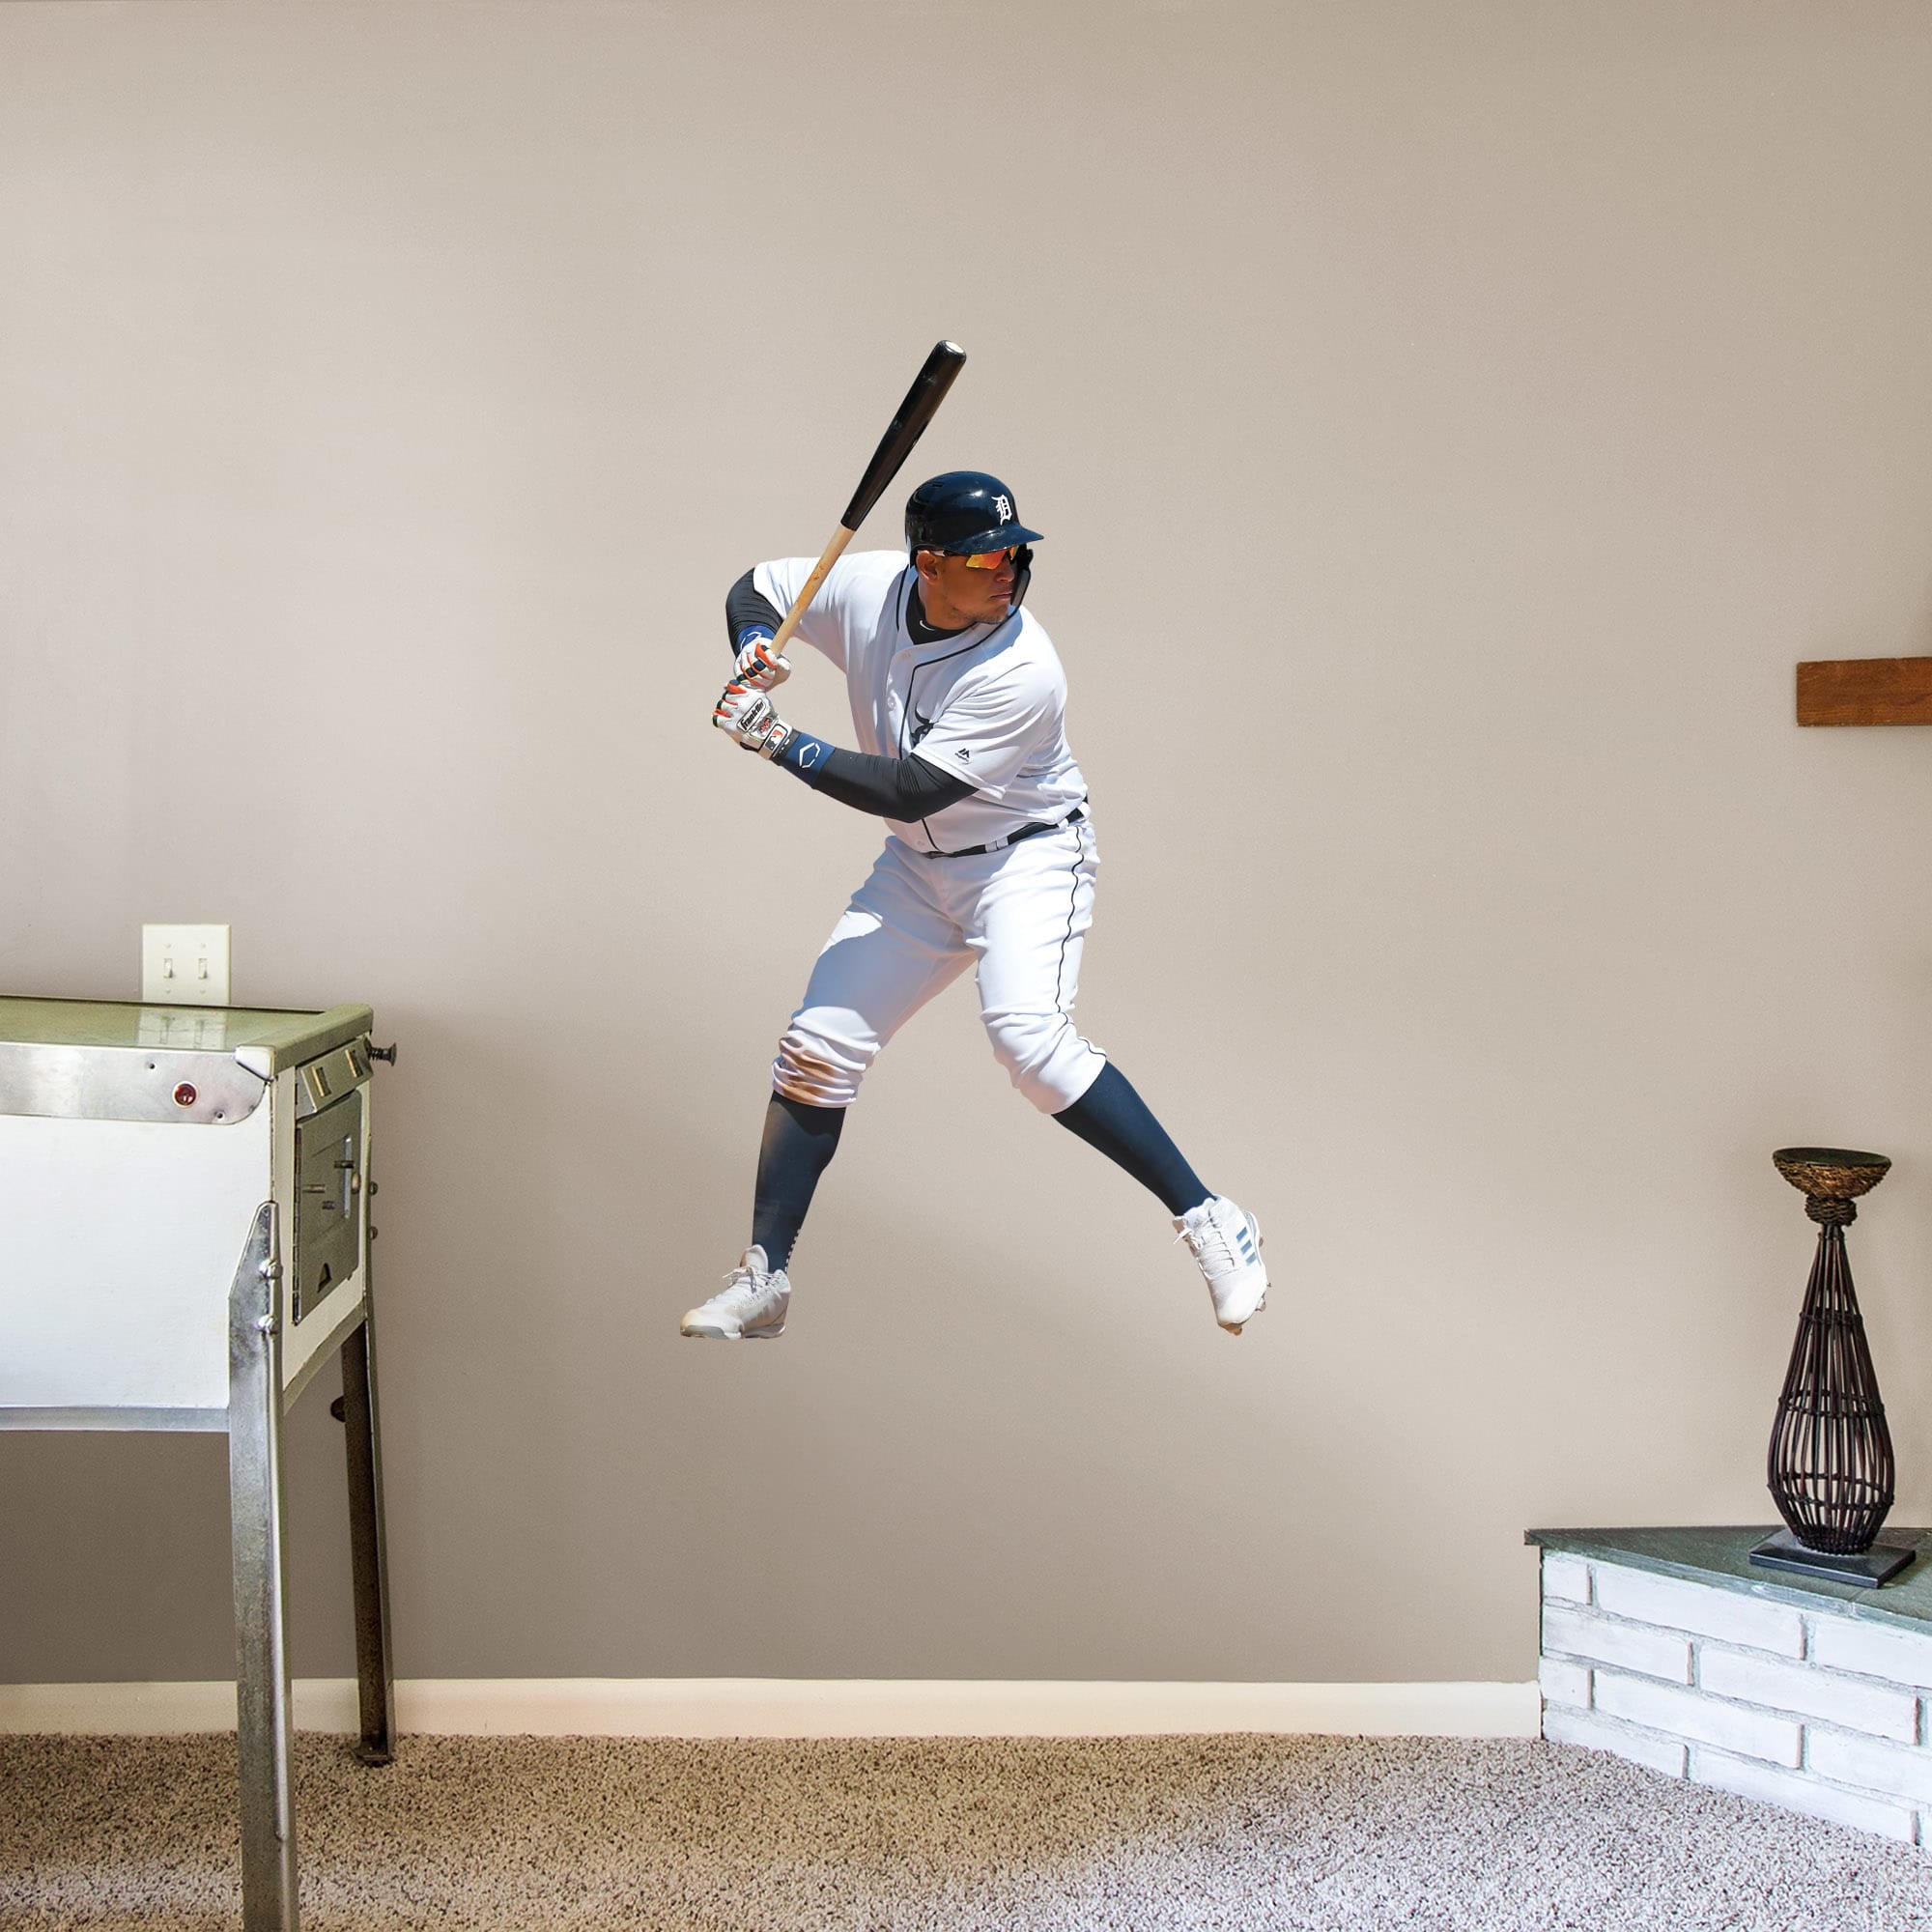 Miguel Cabrera for Detroit Tigers: At Bat - Officially Licensed MLB Removable Wall Decal Giant Athlete + 2 Decals (31"W x 51"H)